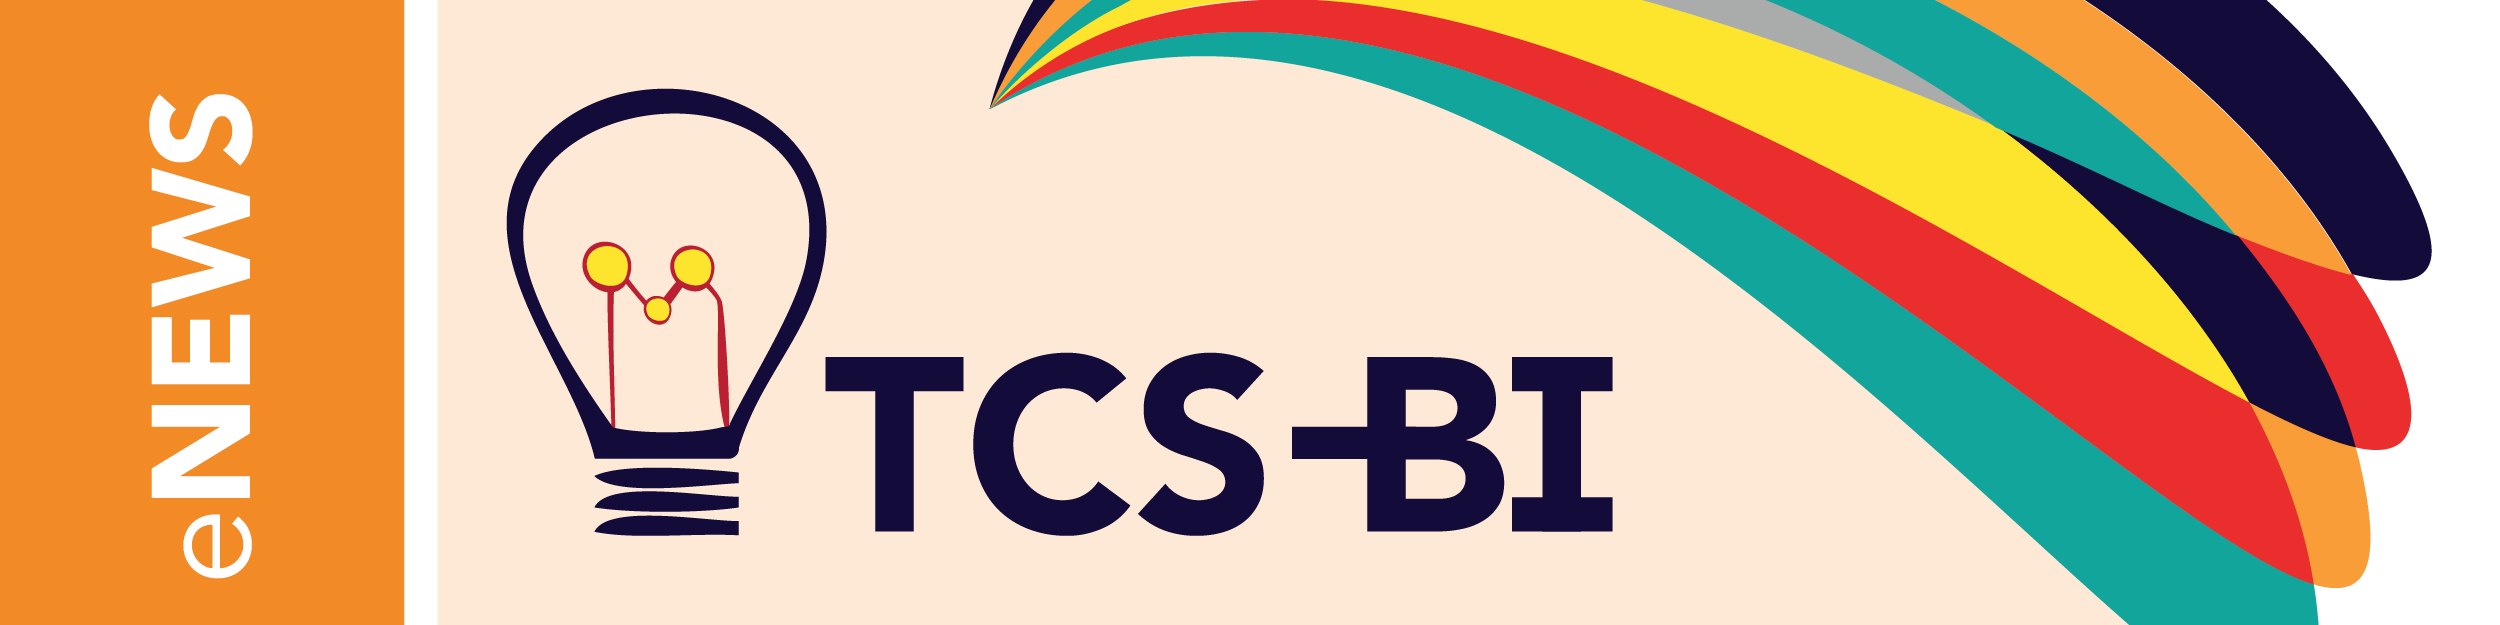 TCS BI – Who we are and what we do